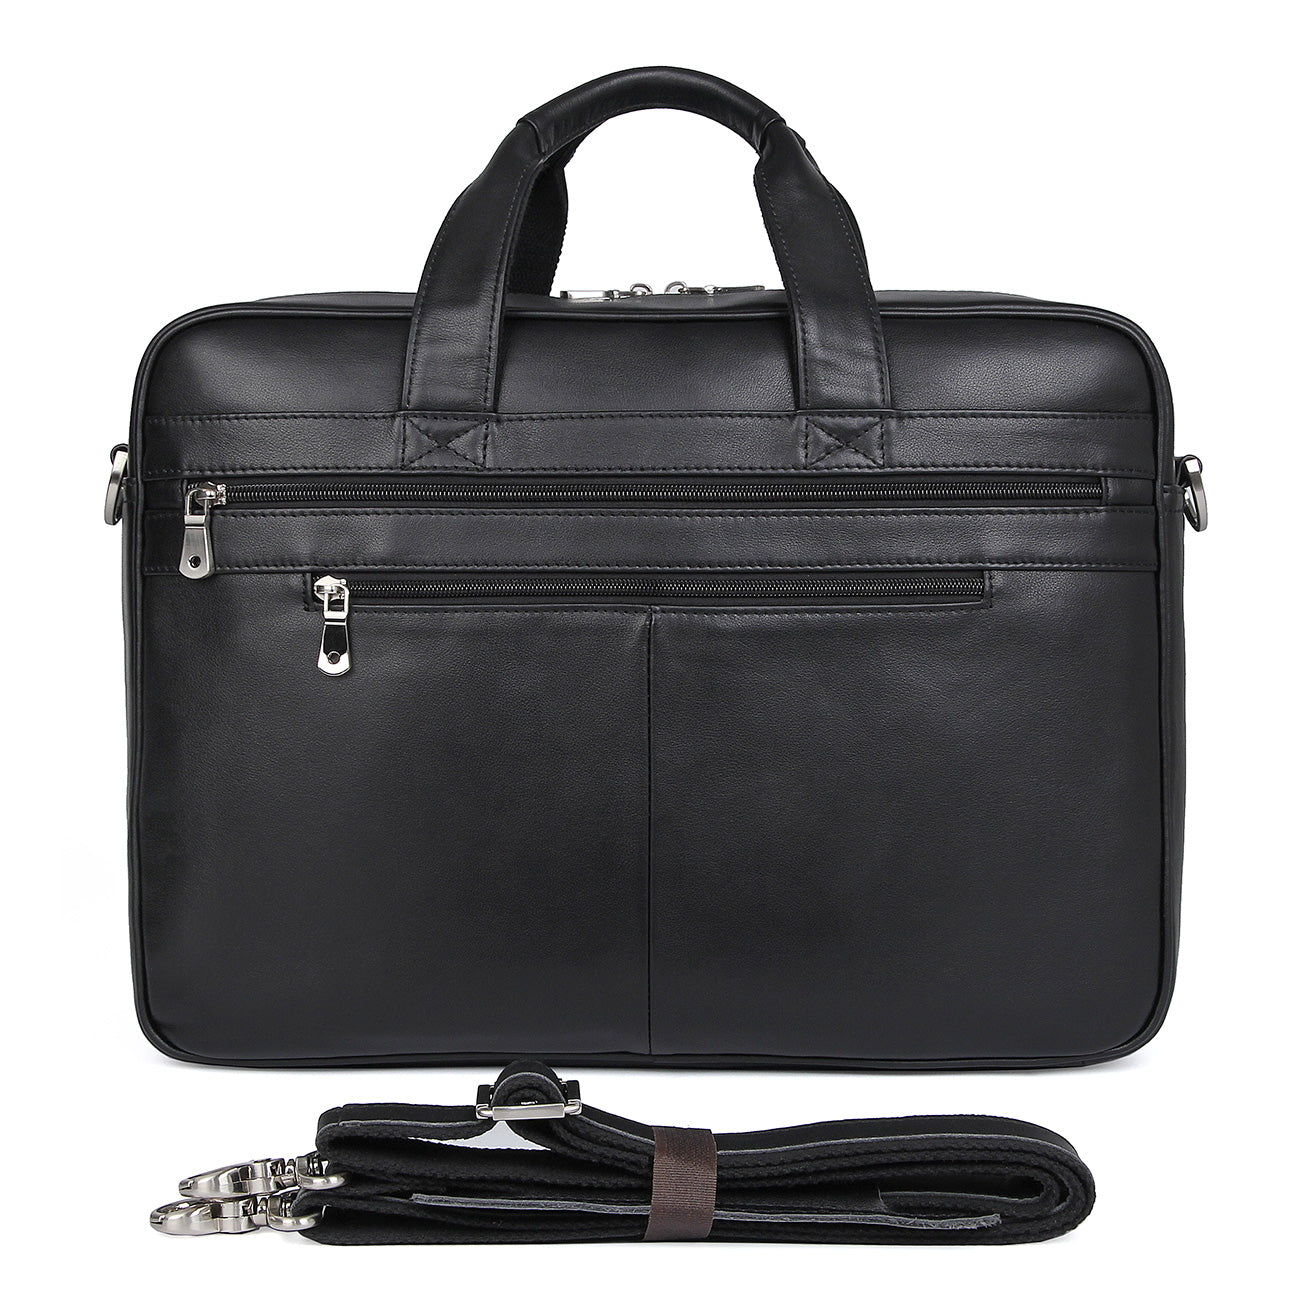 Polare 17" Real Italian Leather Laptop Case Professional Briefcase Business Bag (Black)